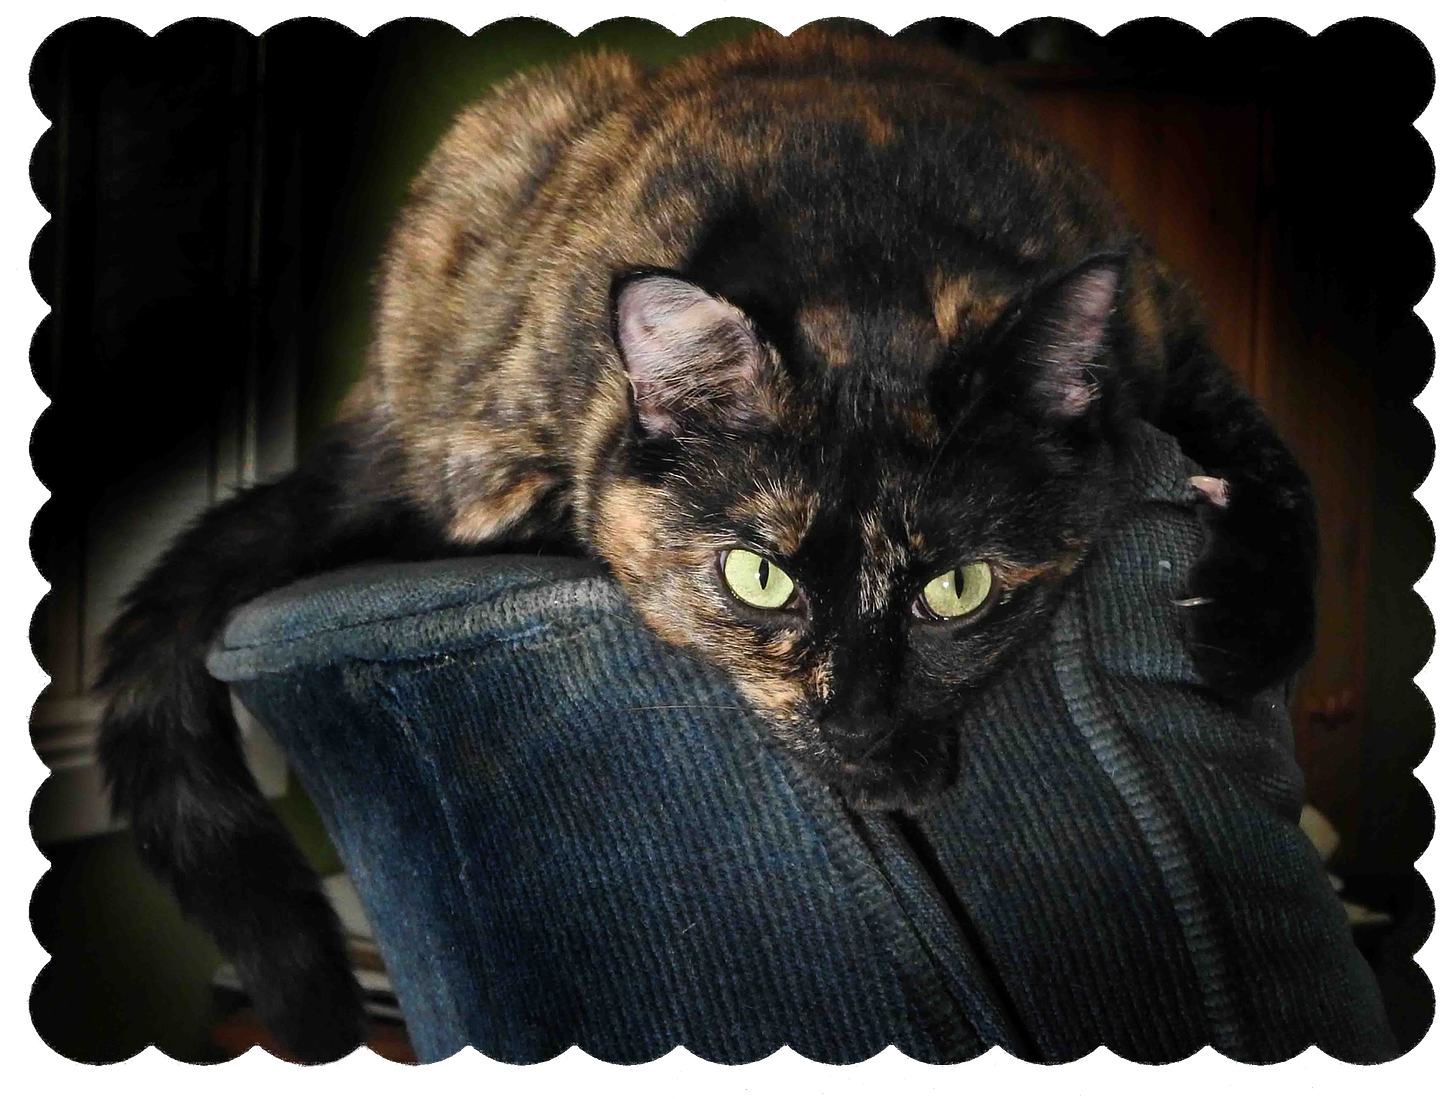 Photograph of a tortoiseshell-colored cat staring at the camera, gripping the back of an overstuffed blue chair.